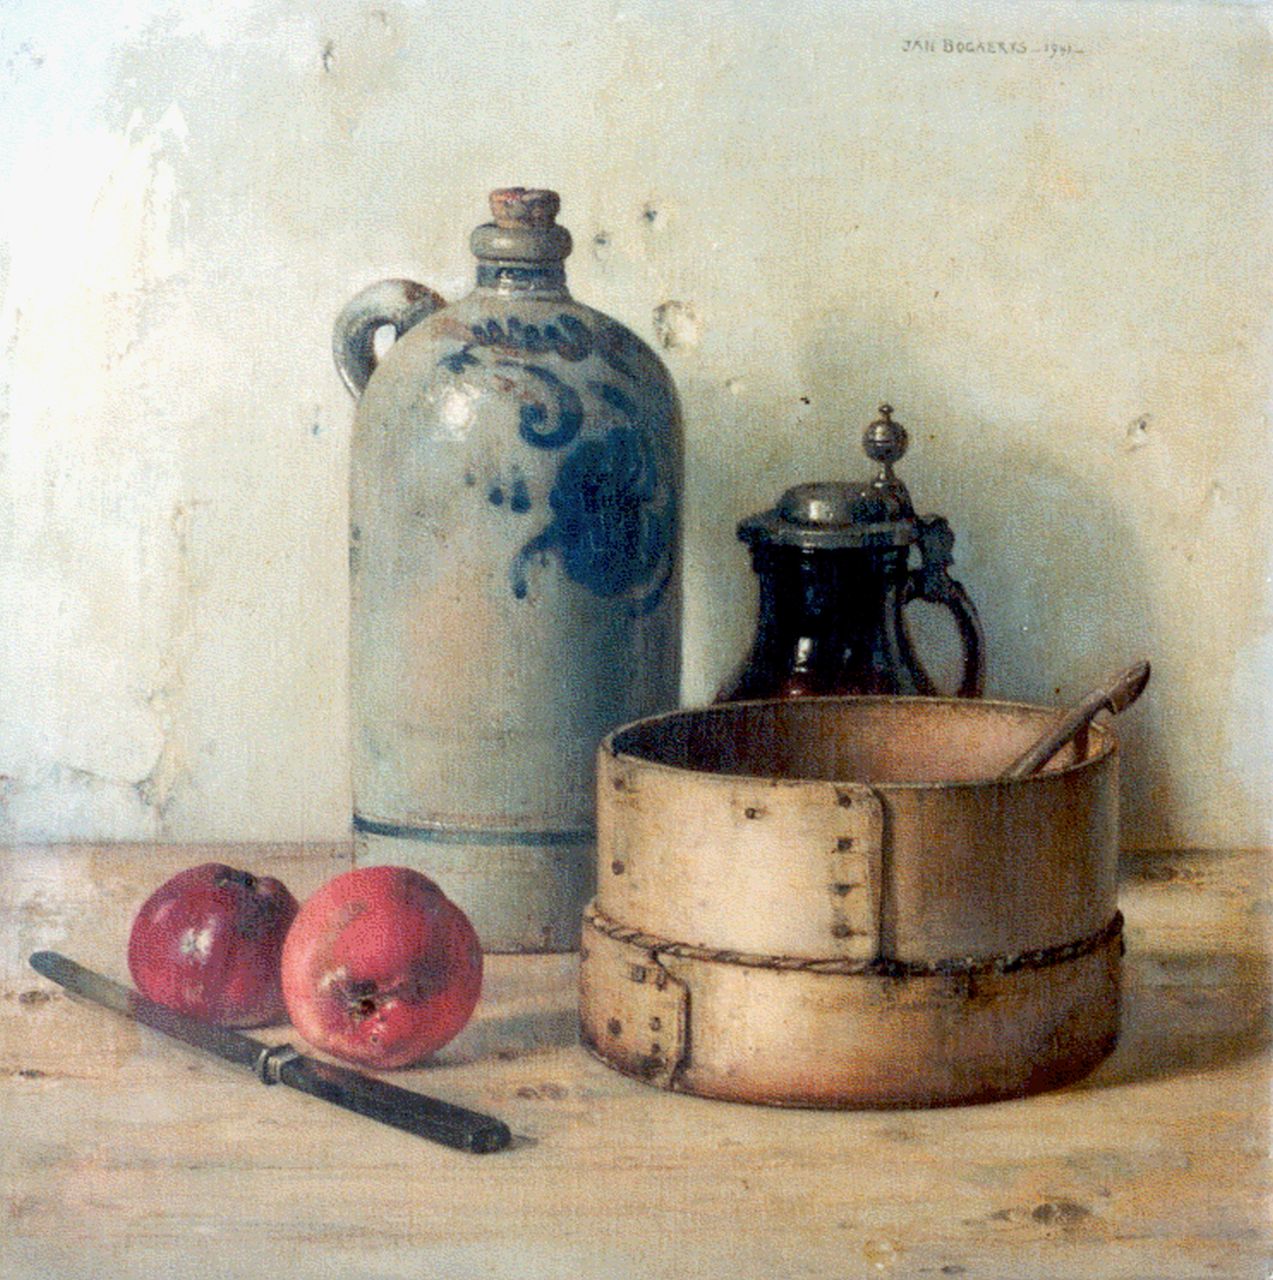 Bogaerts J.J.M.  | Johannes Jacobus Maria 'Jan' Bogaerts, A still life with strainer, oil on canvas 50.2 x 50.2 cm, signed u.r. and dated 1941